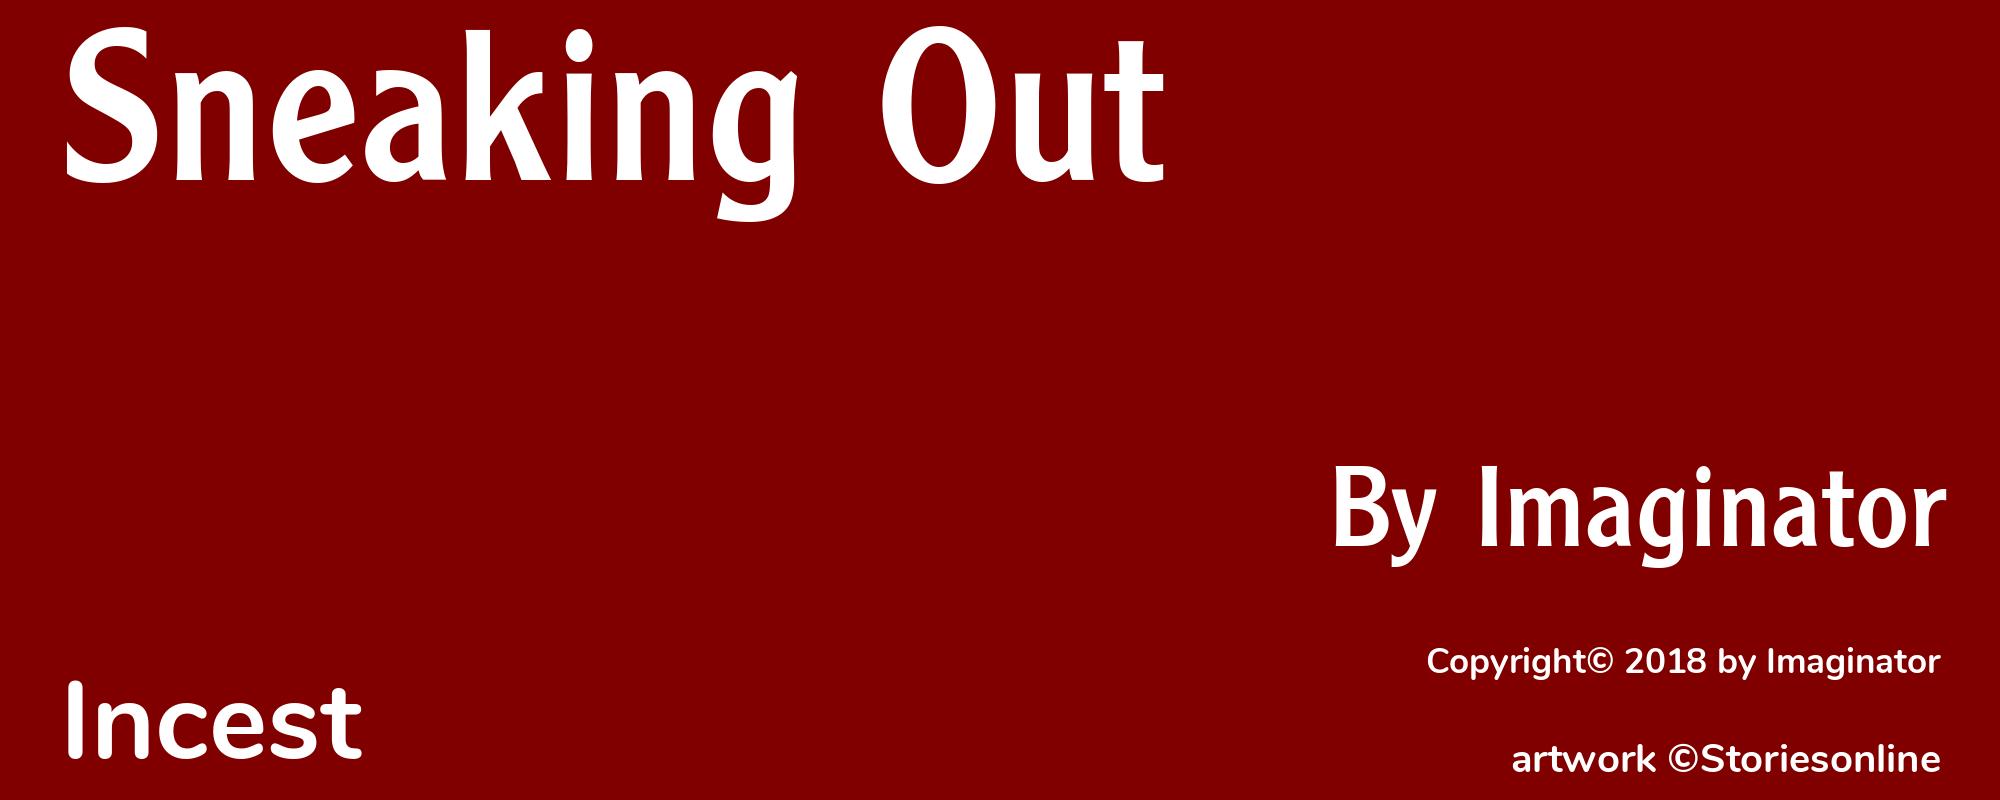 Sneaking Out - Cover